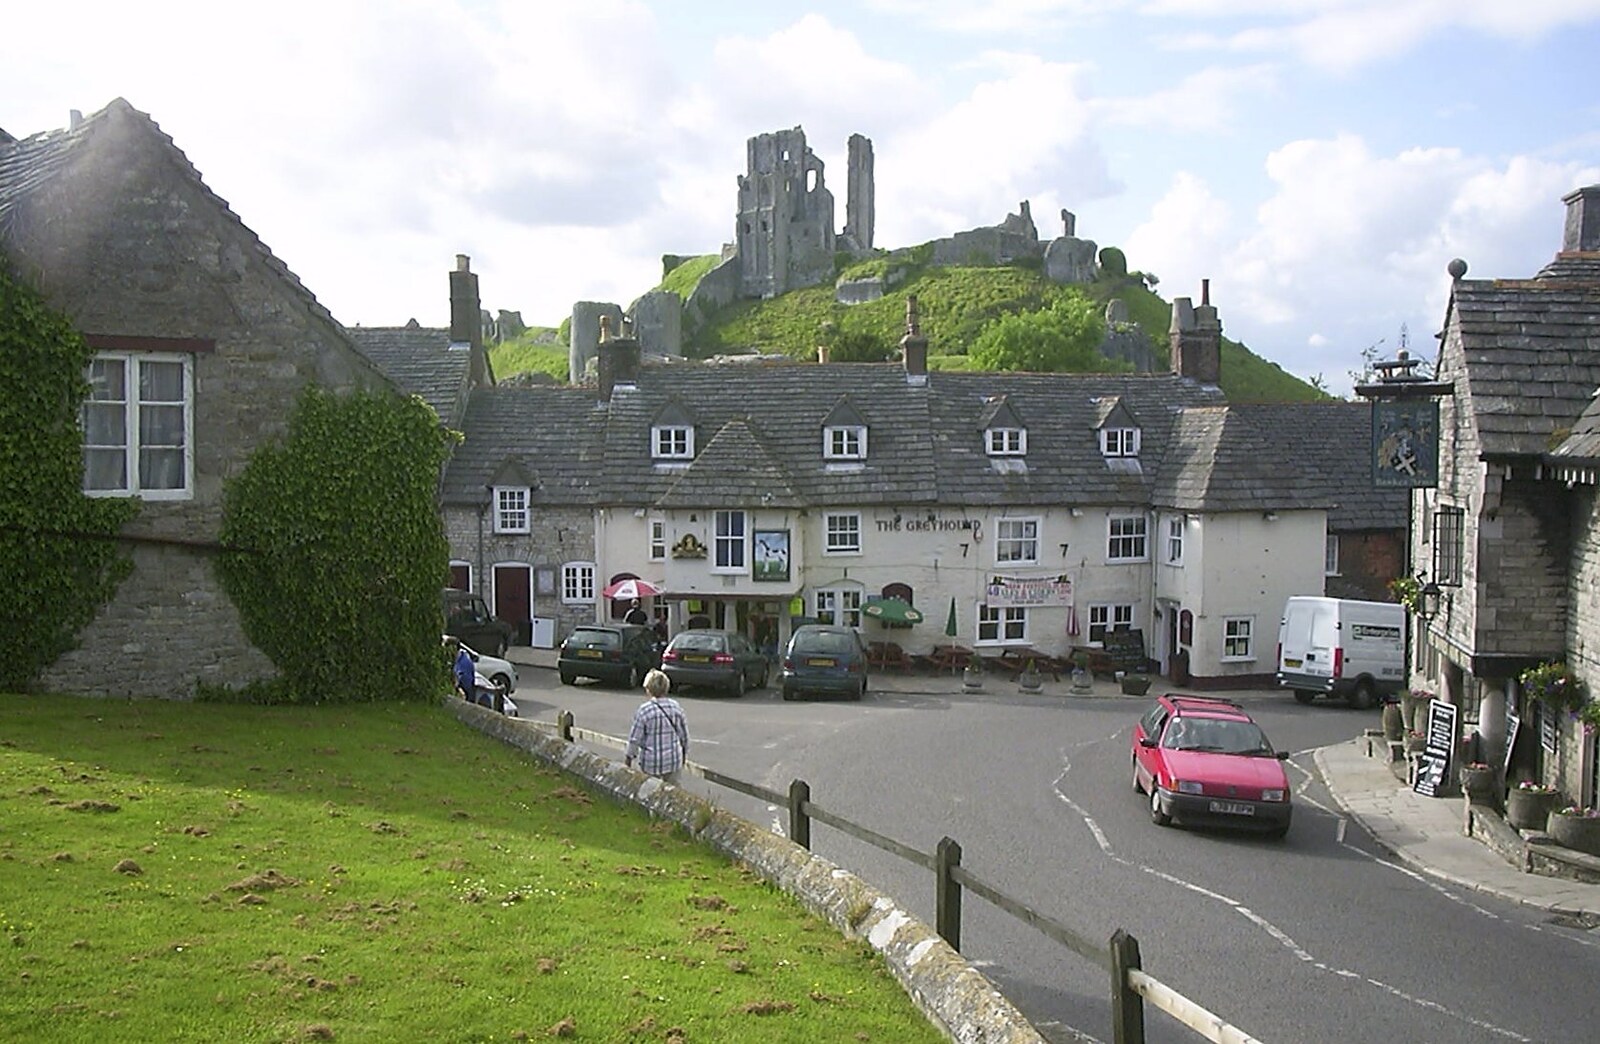 Corfe Castle Camping, Corfe, Dorset - 30th May 2004: A view of the Greyhound pub